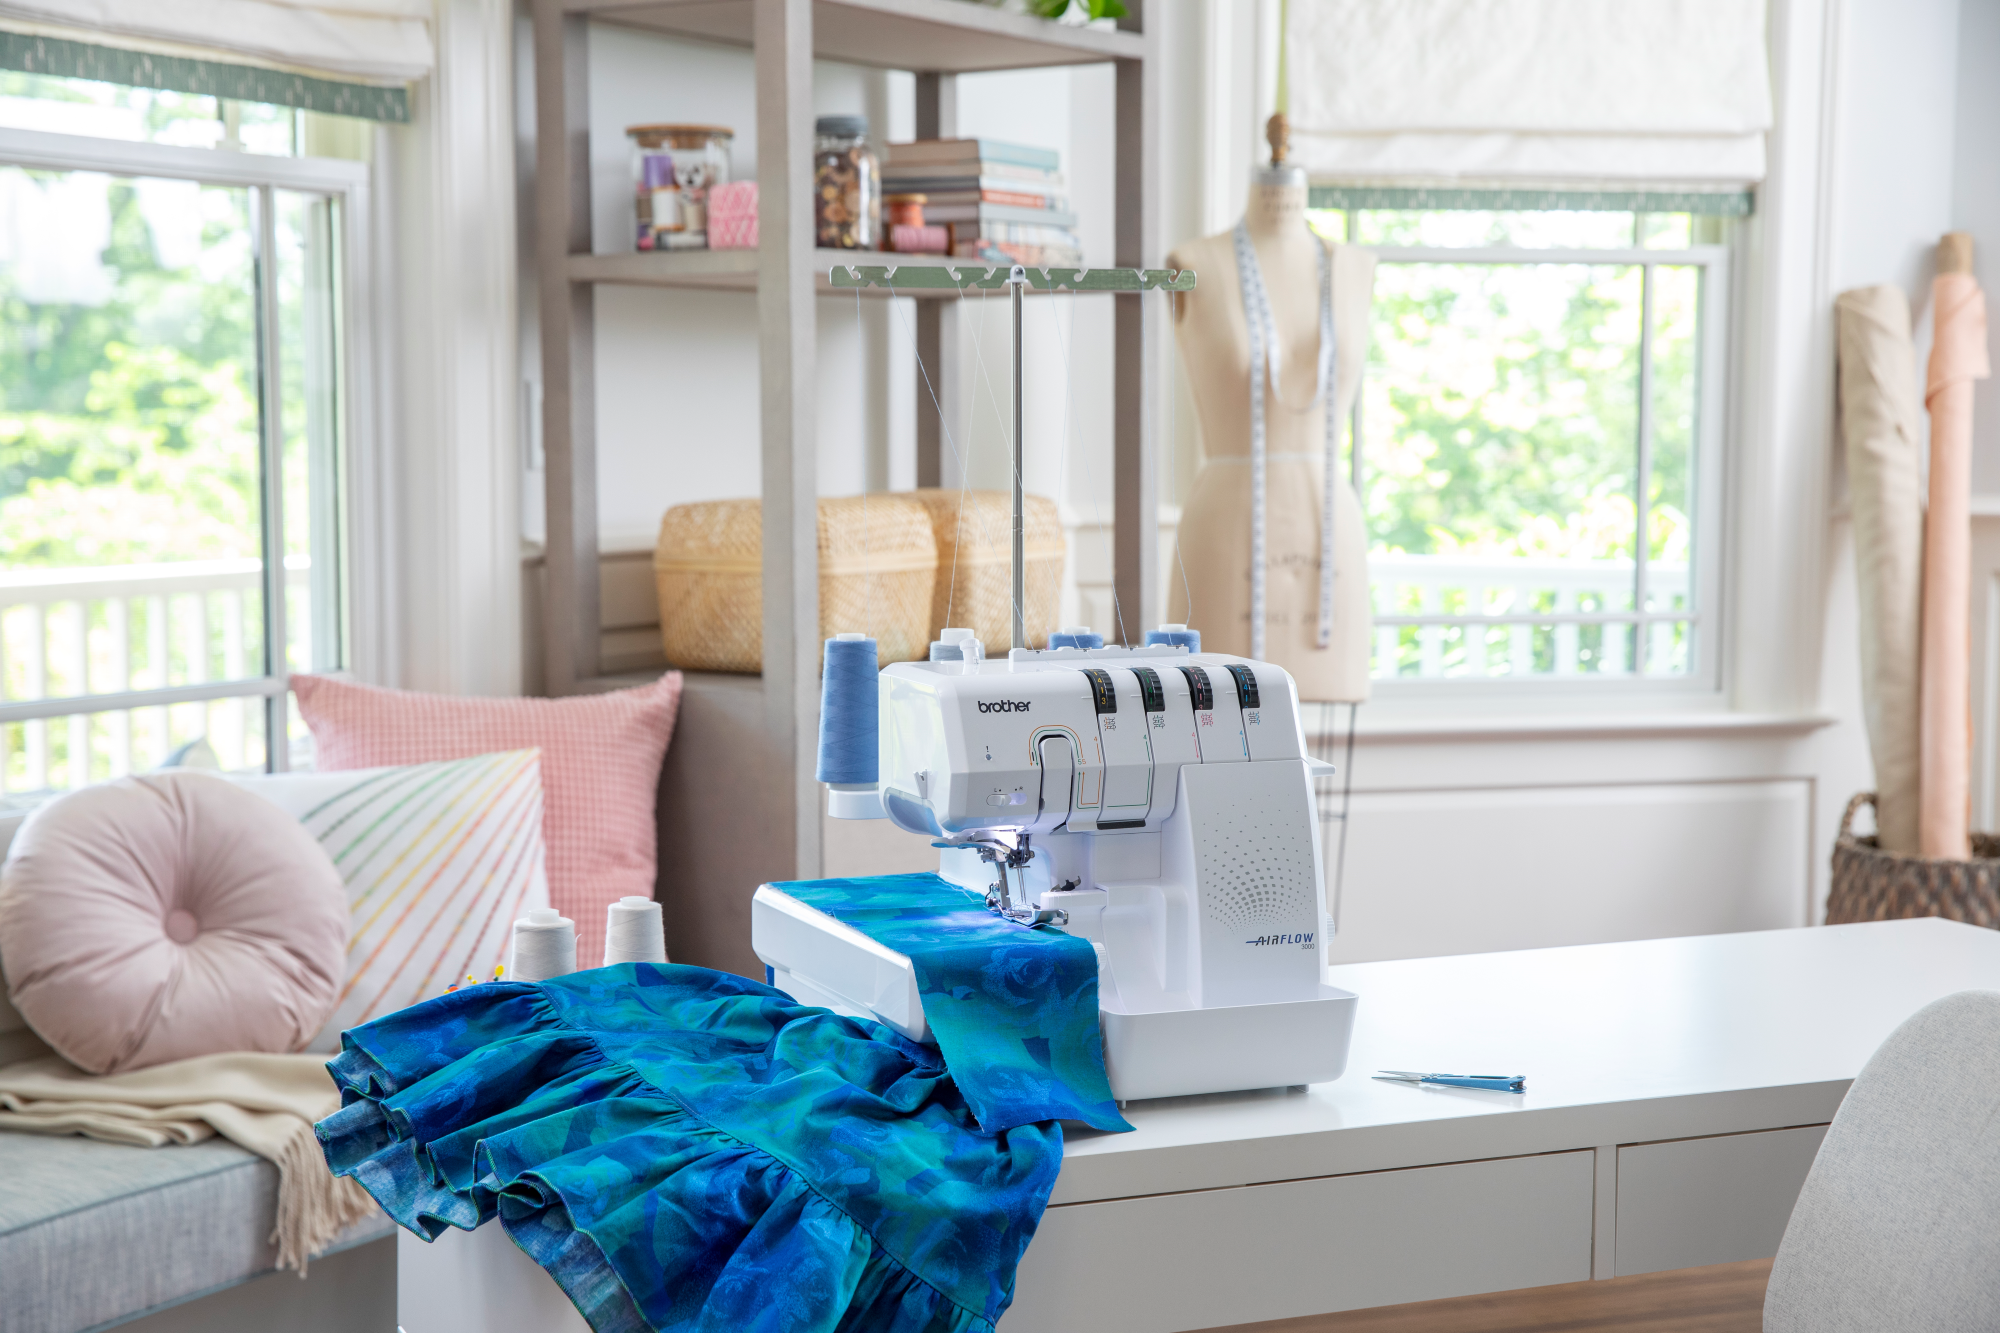 image of the Brother AIRFLOW 3000 Air Serger with sewing example on a table